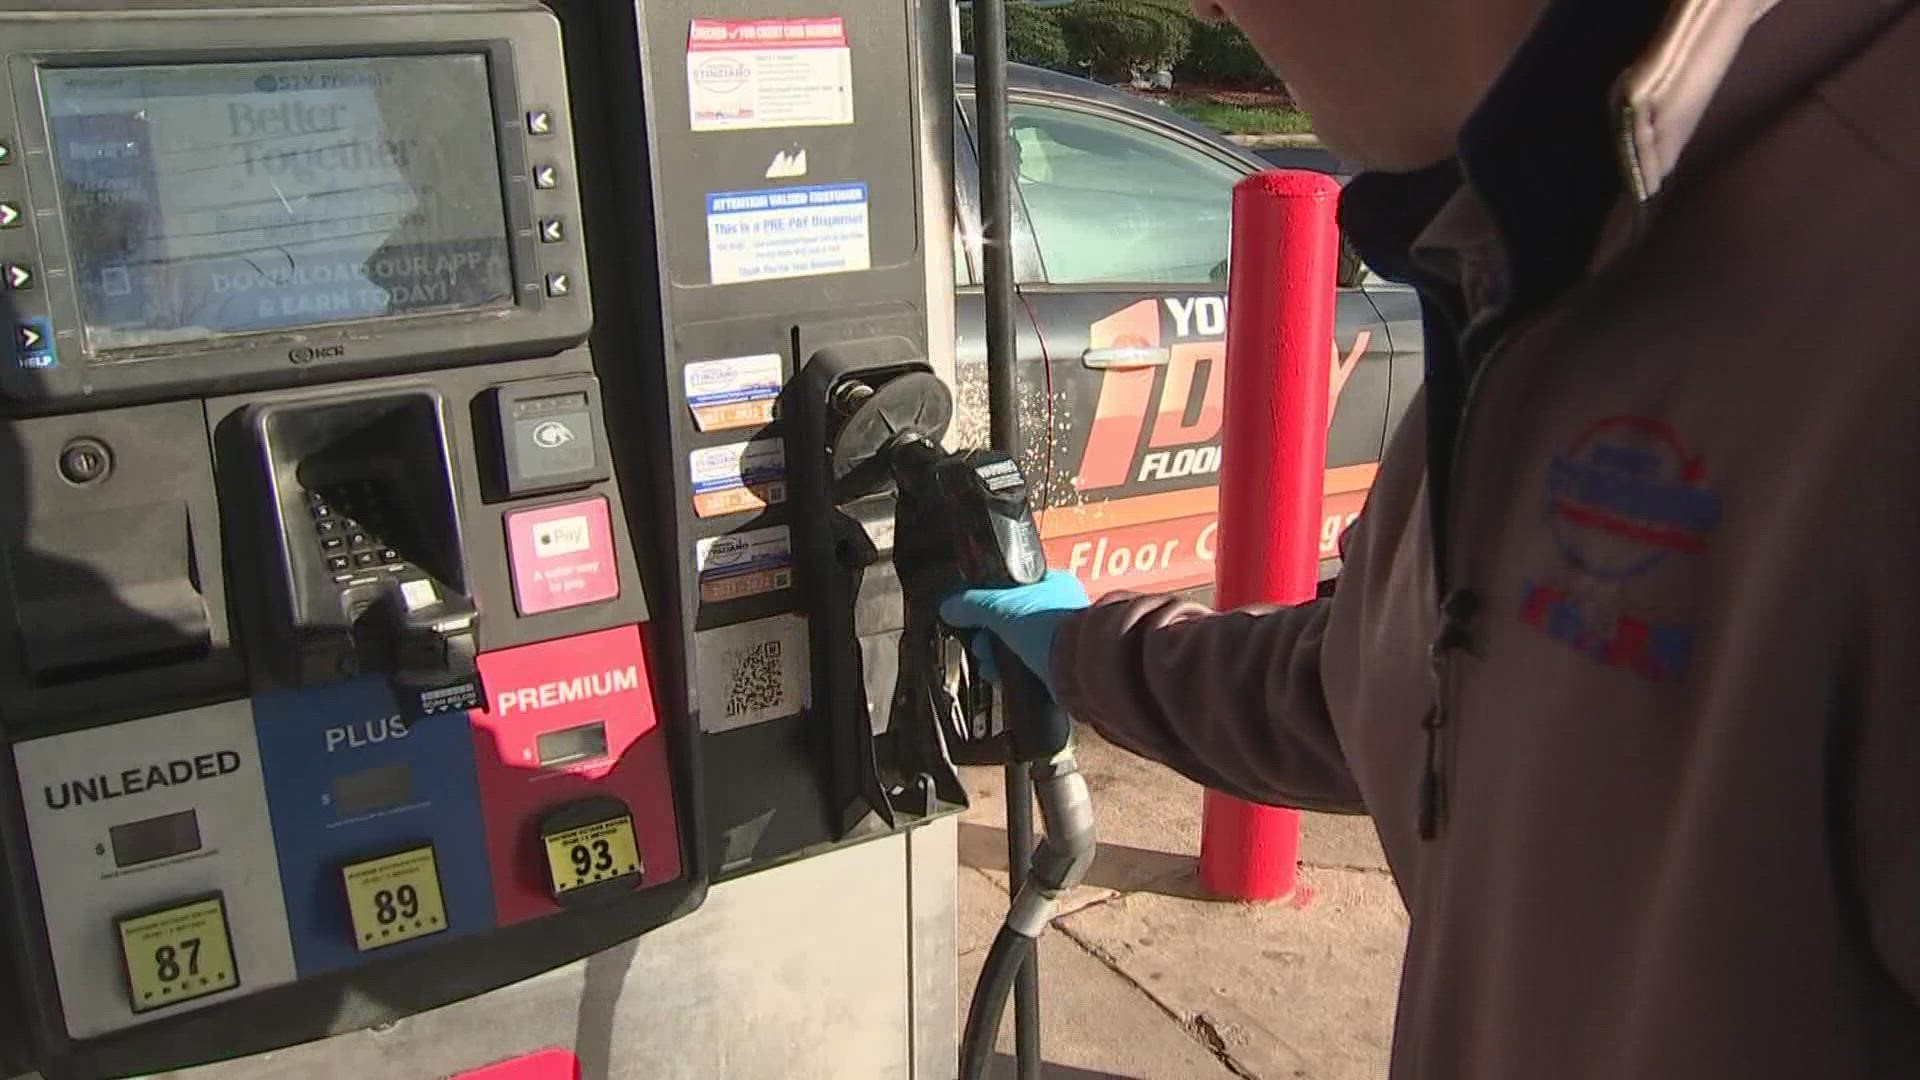 We tell you how to inspect and protect your money at the pump with a simple "double-check."